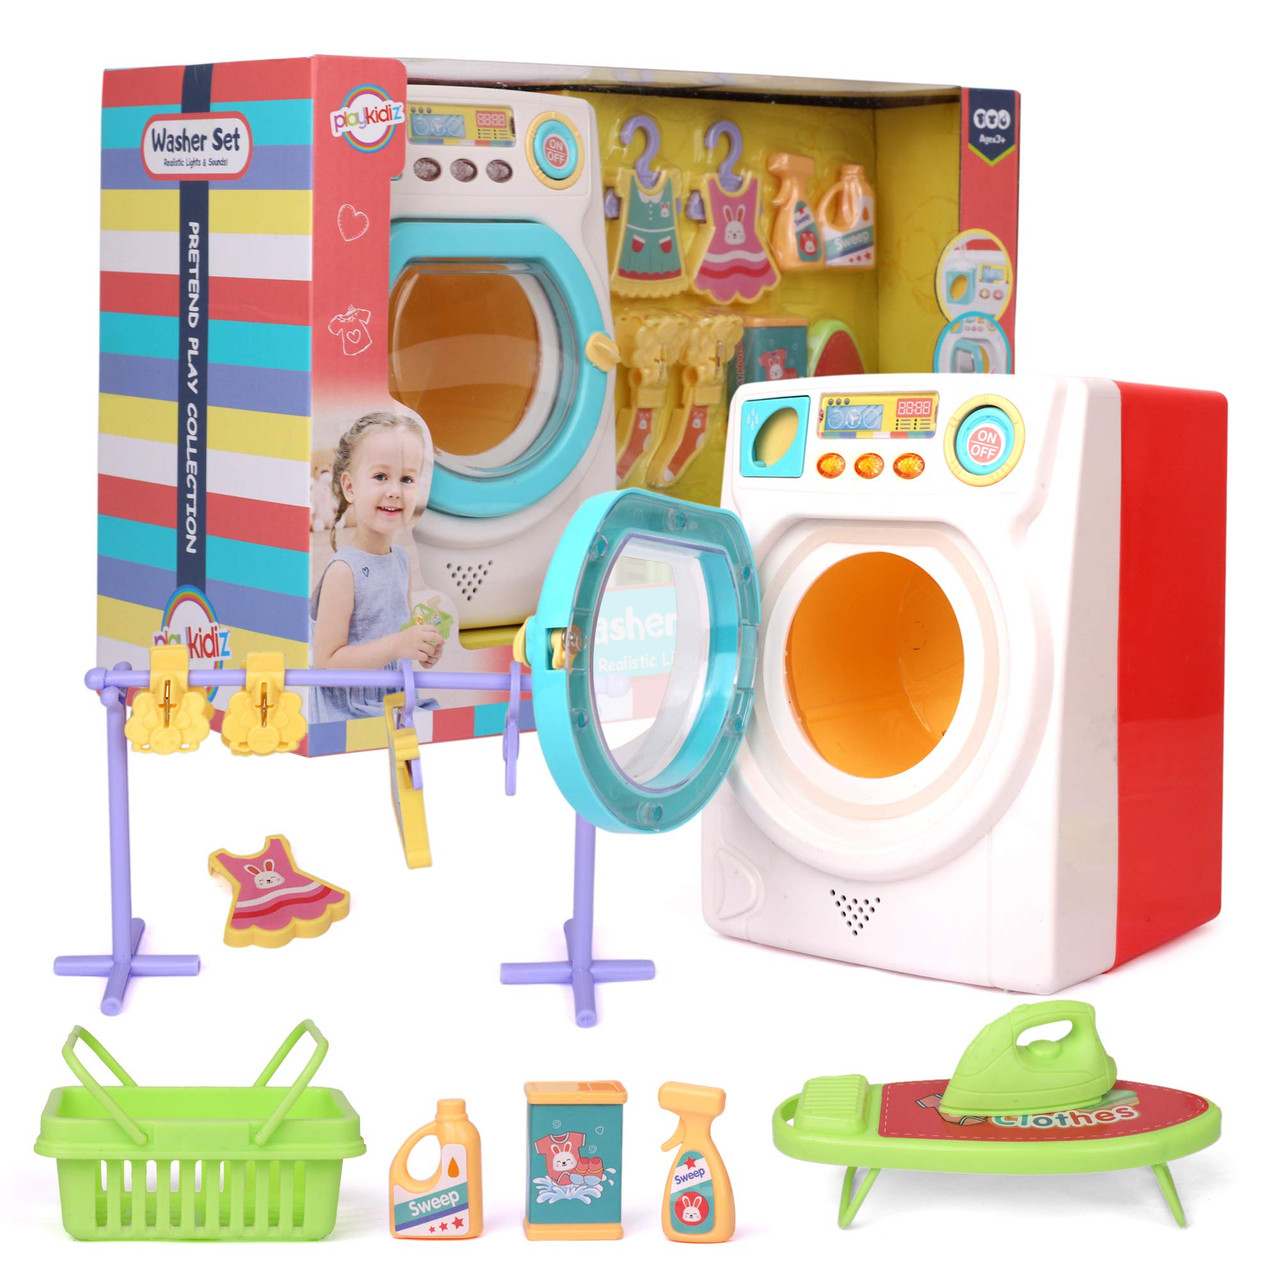 BRIGPICIOUS Toy Washing Machine Laundry Set for Kids,Pretend Toy Play  Washer and Dryer Set Laundry Playset Machine for Kids,Toy Toddler Mini  Washing